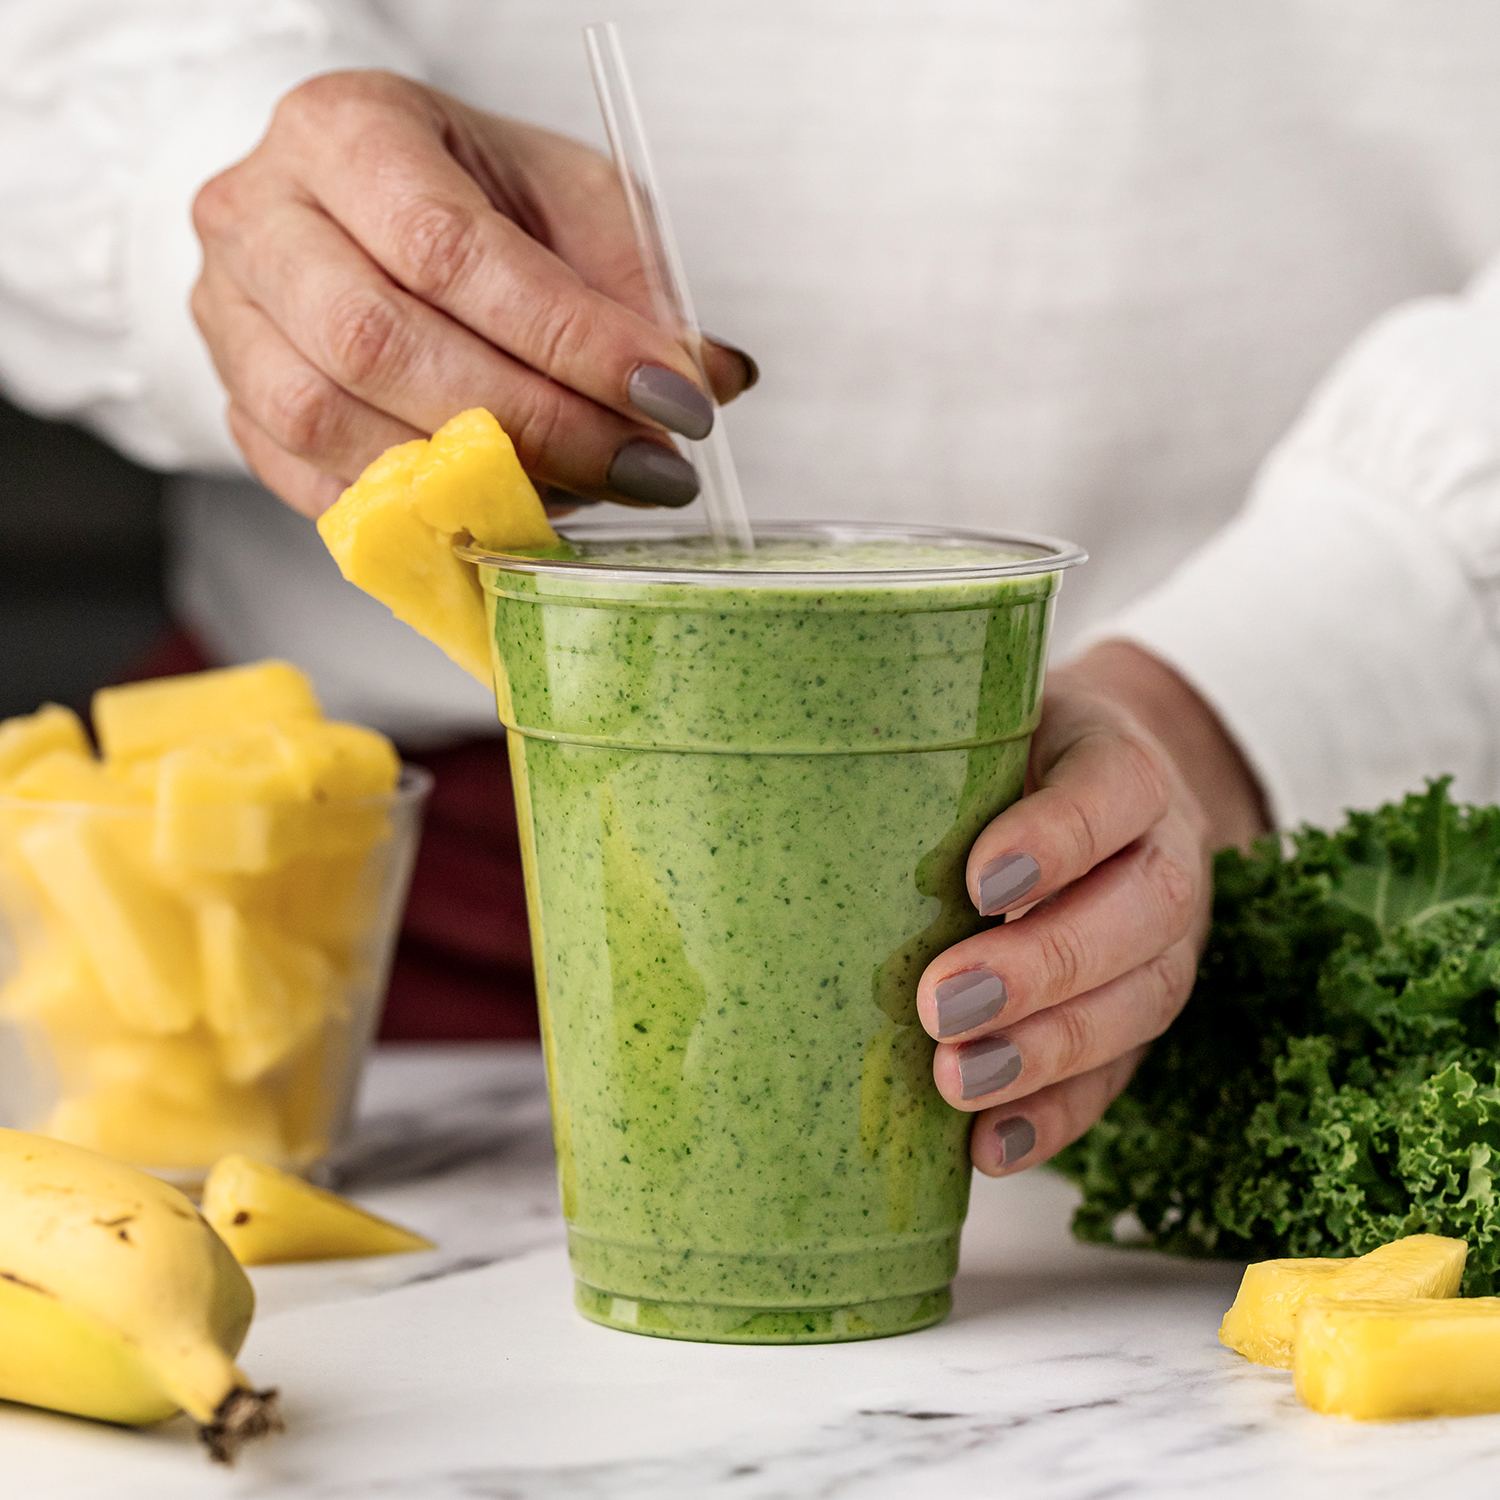 Kale-Pineapple Smoothies Recipe - Chinet®